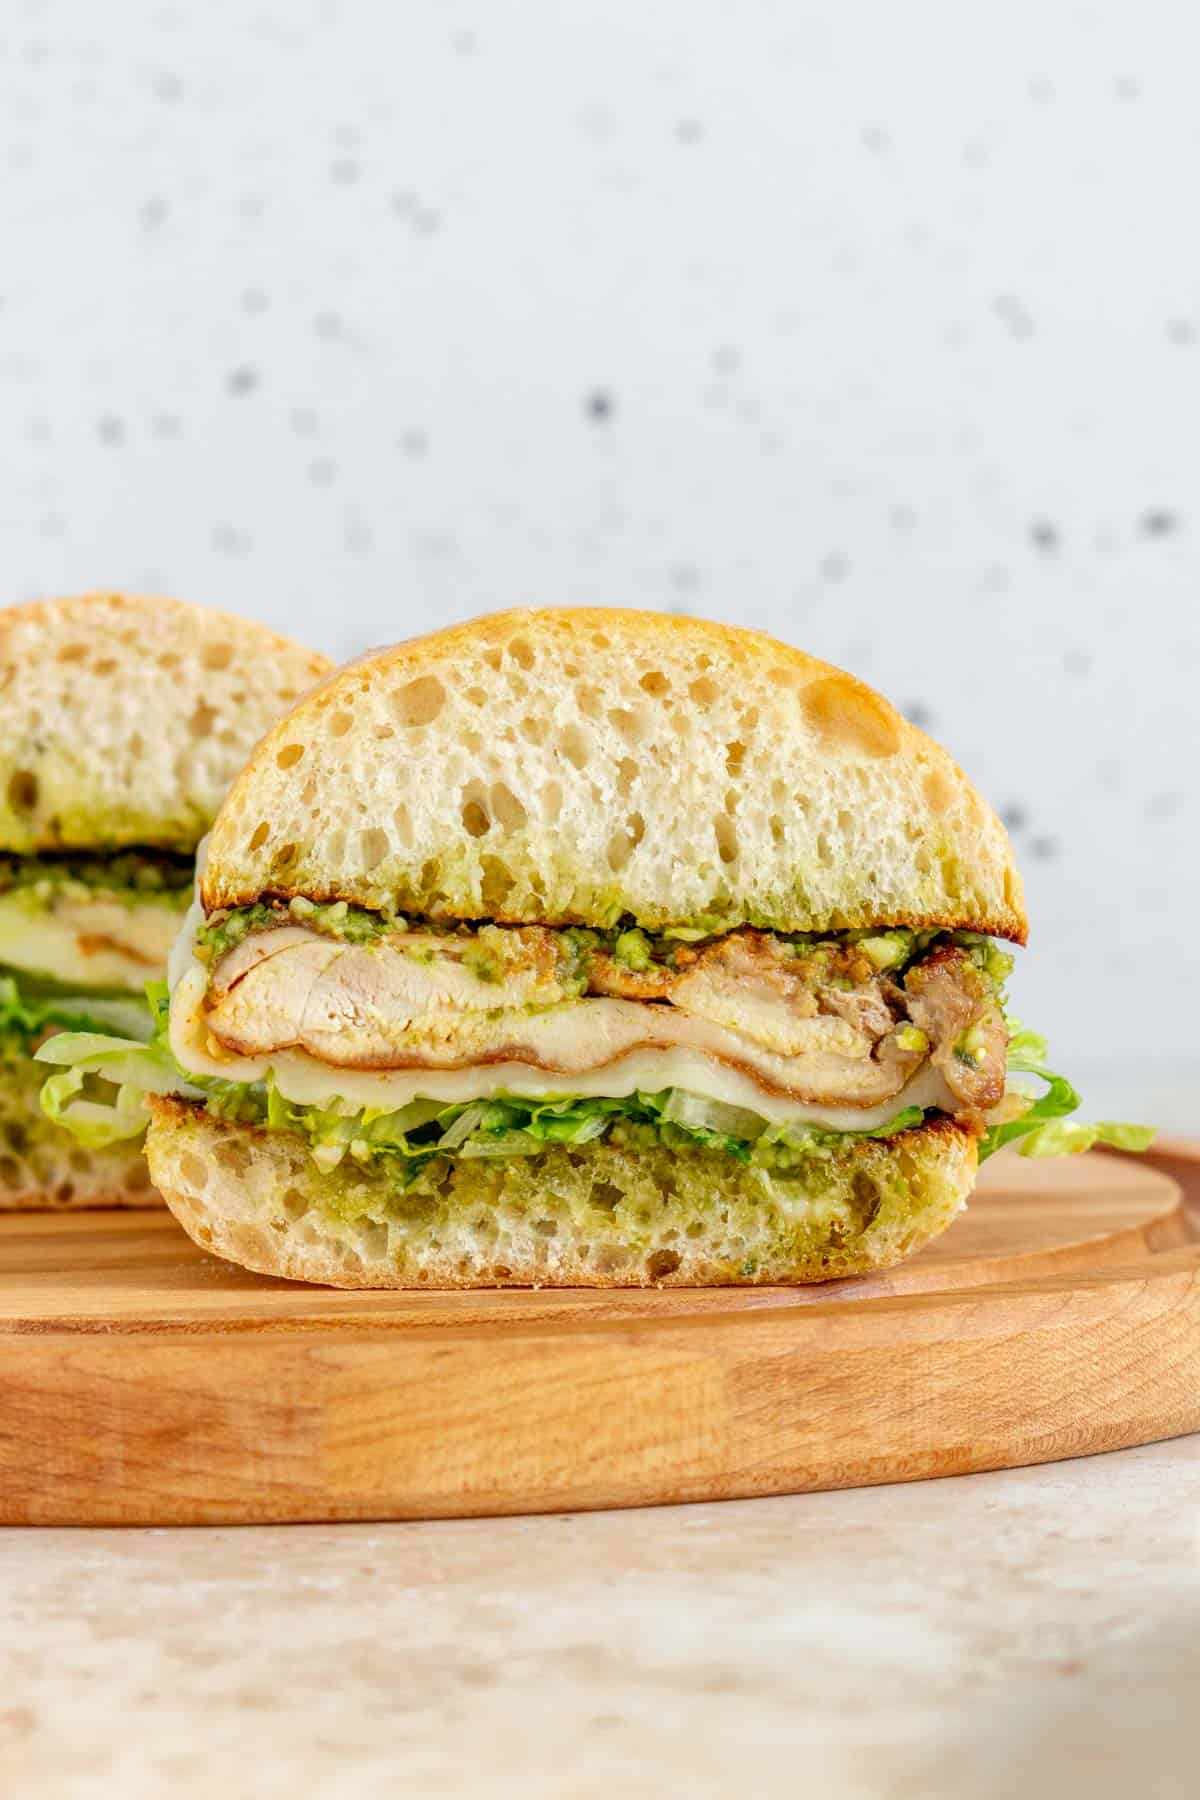 A profile view of a pesto chicken sandwich on a wooden serving board.